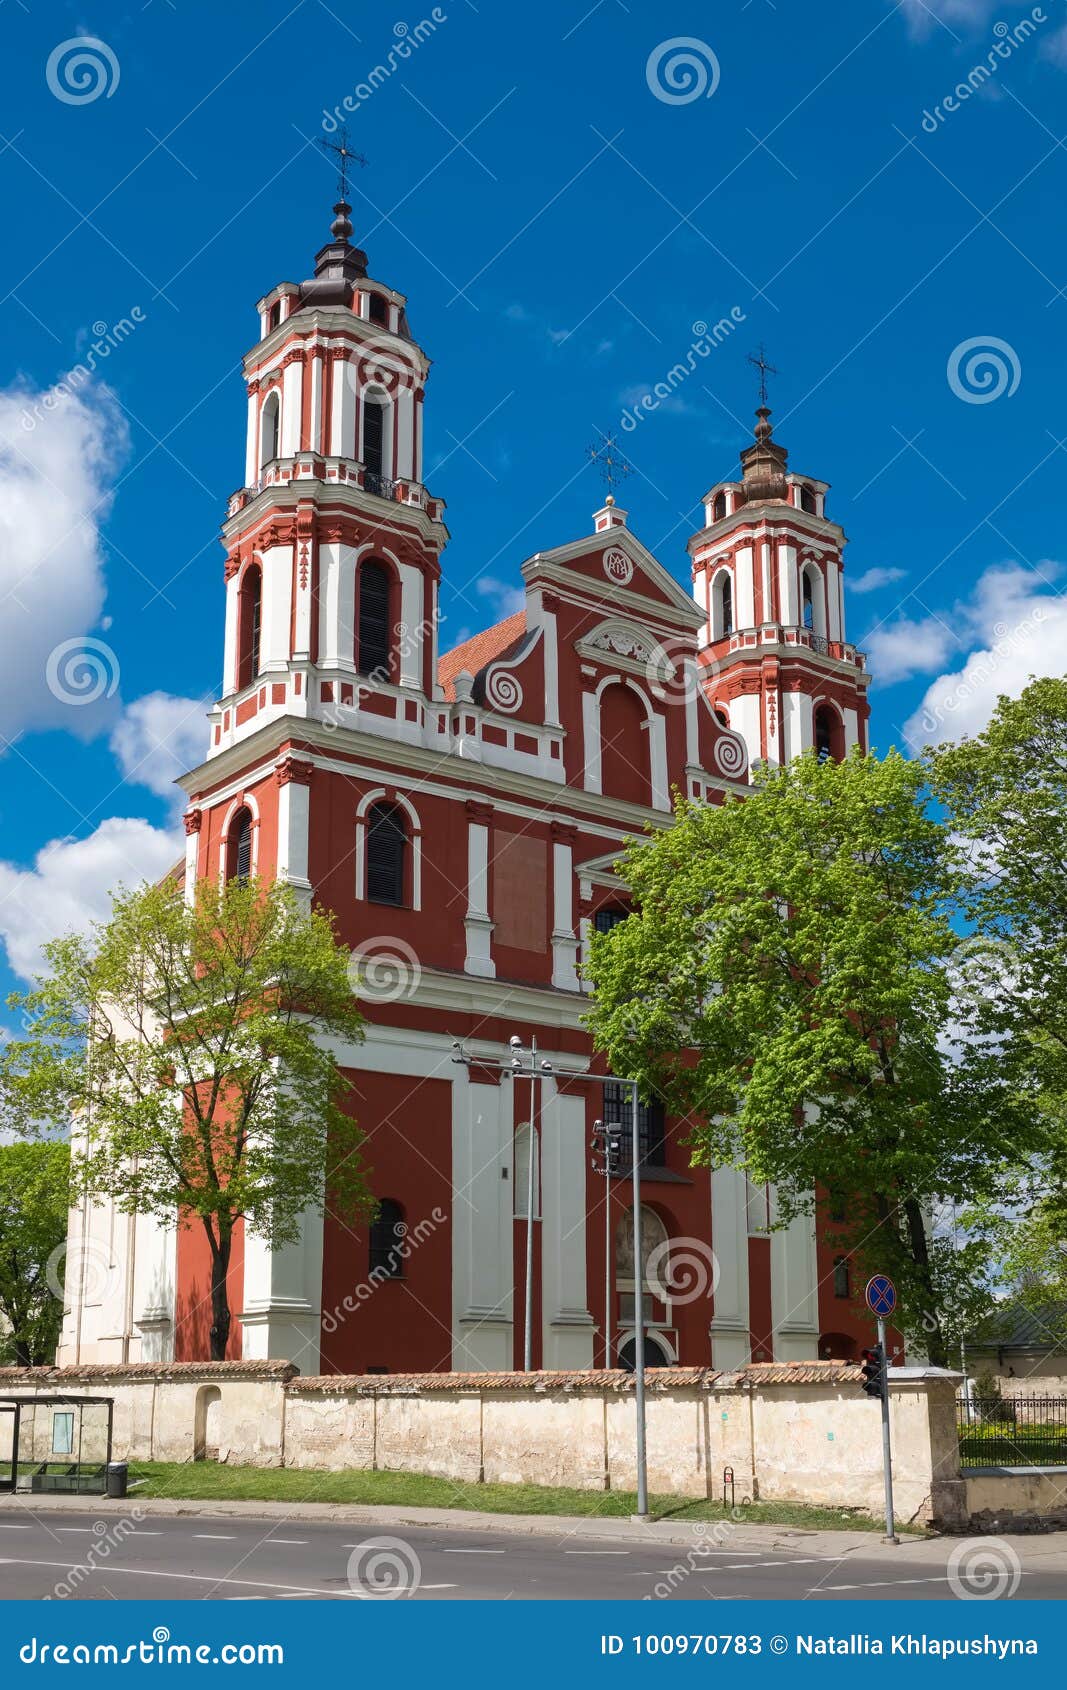 church of st. philip and st. jacob in vilnius, lithuania.